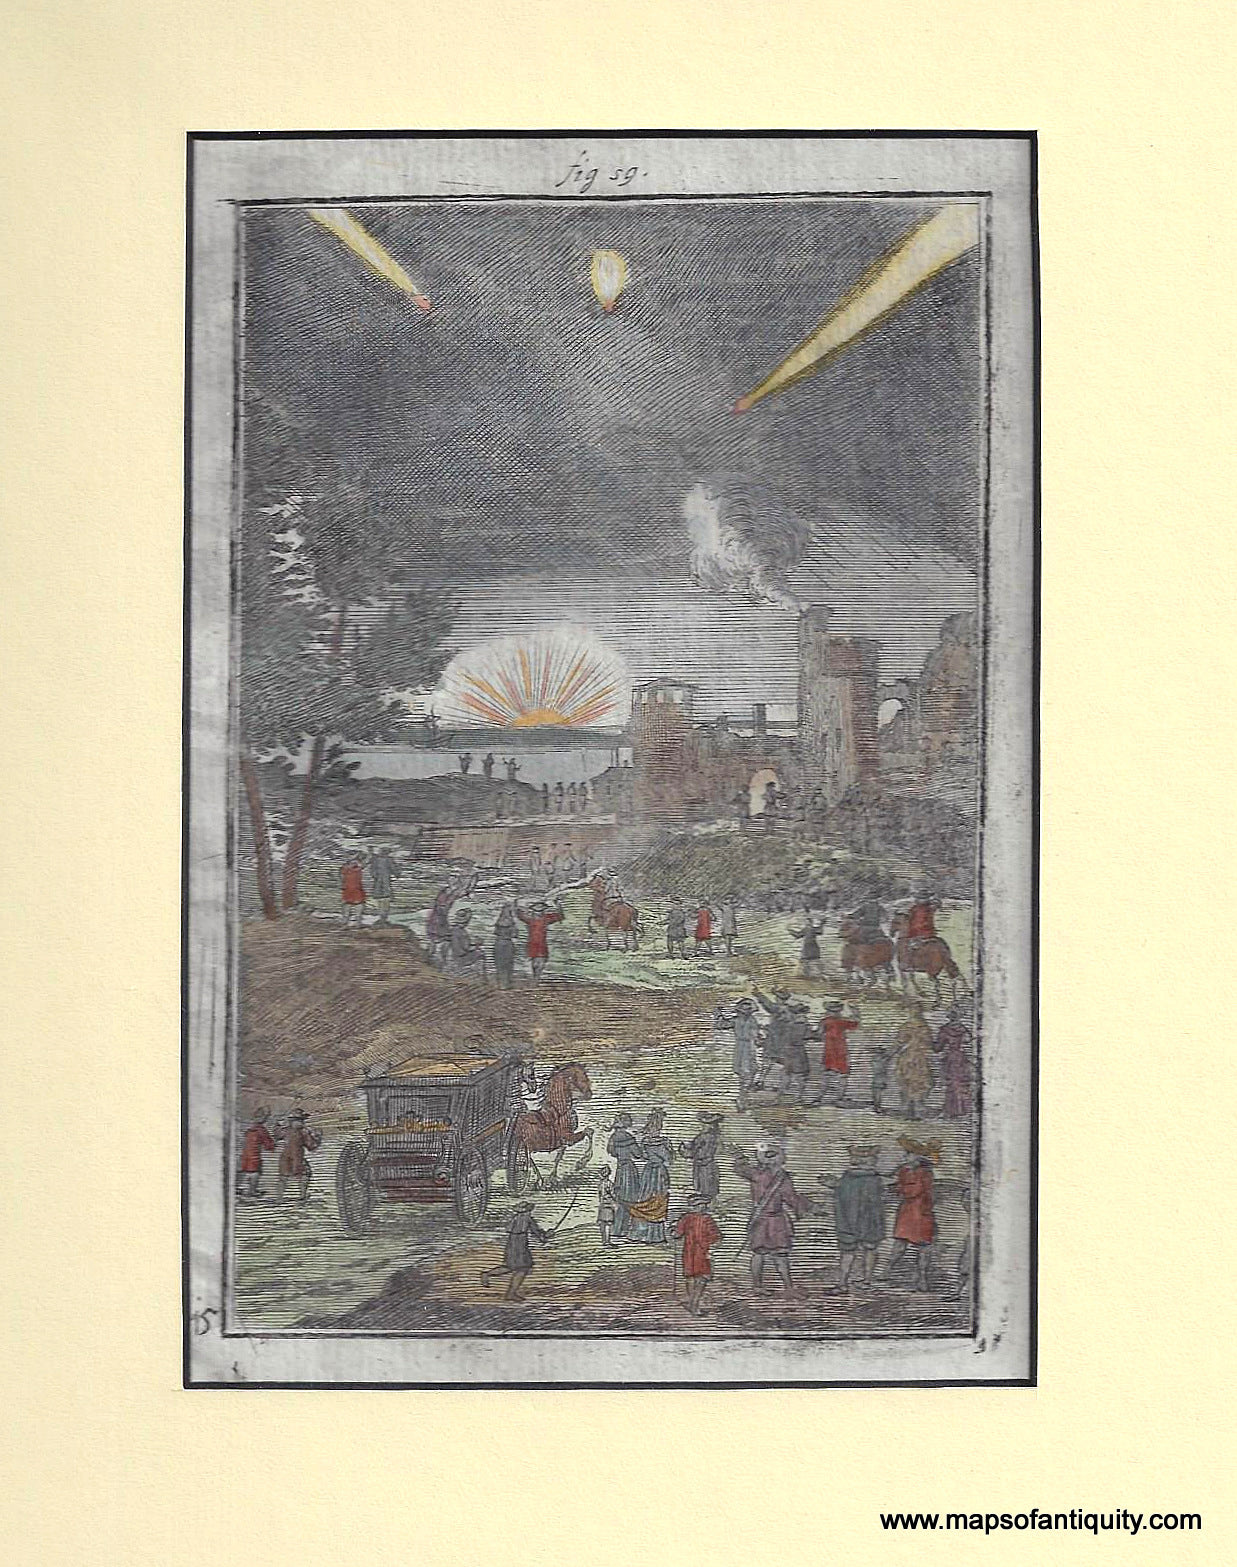 Antique-Hand-Colored-Celestial-Map-Medieval-Town-with-Comets-**********-Celestial--1719-Mallet-Maps-Of-Antiquity